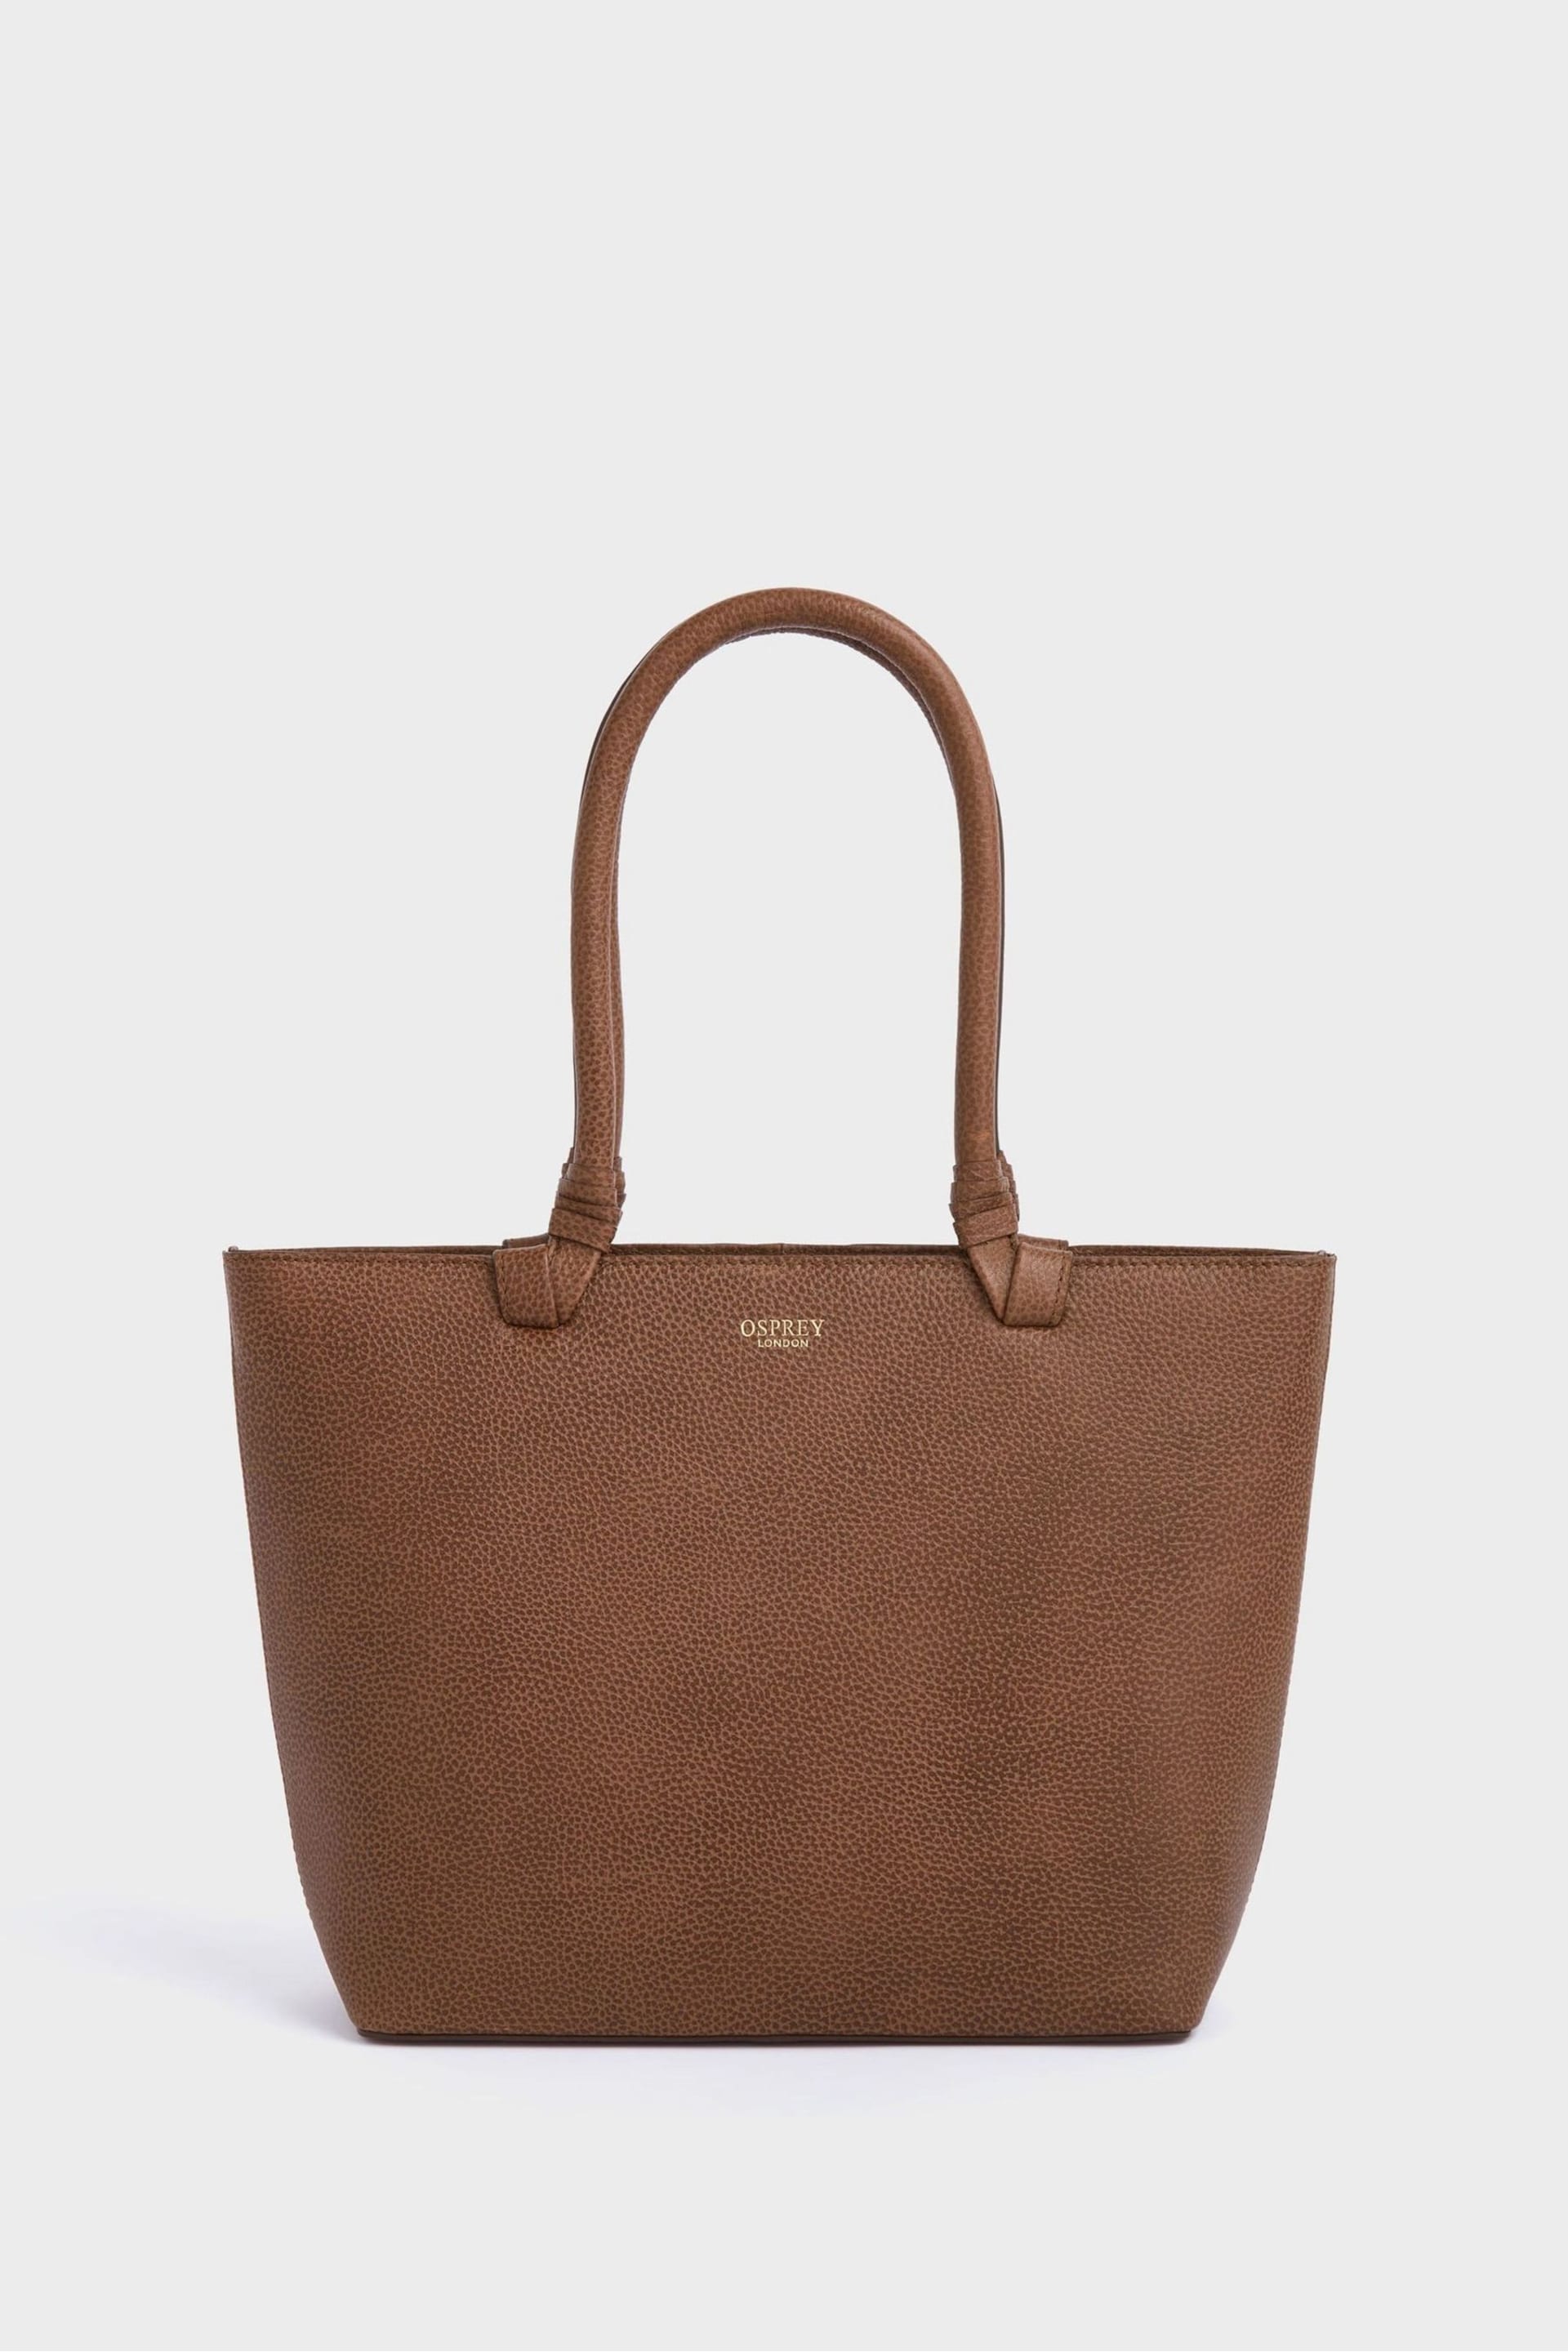 OSPREY LONDON Tan The Collier Leather Shoulder Tote Bag - Image 1 of 5